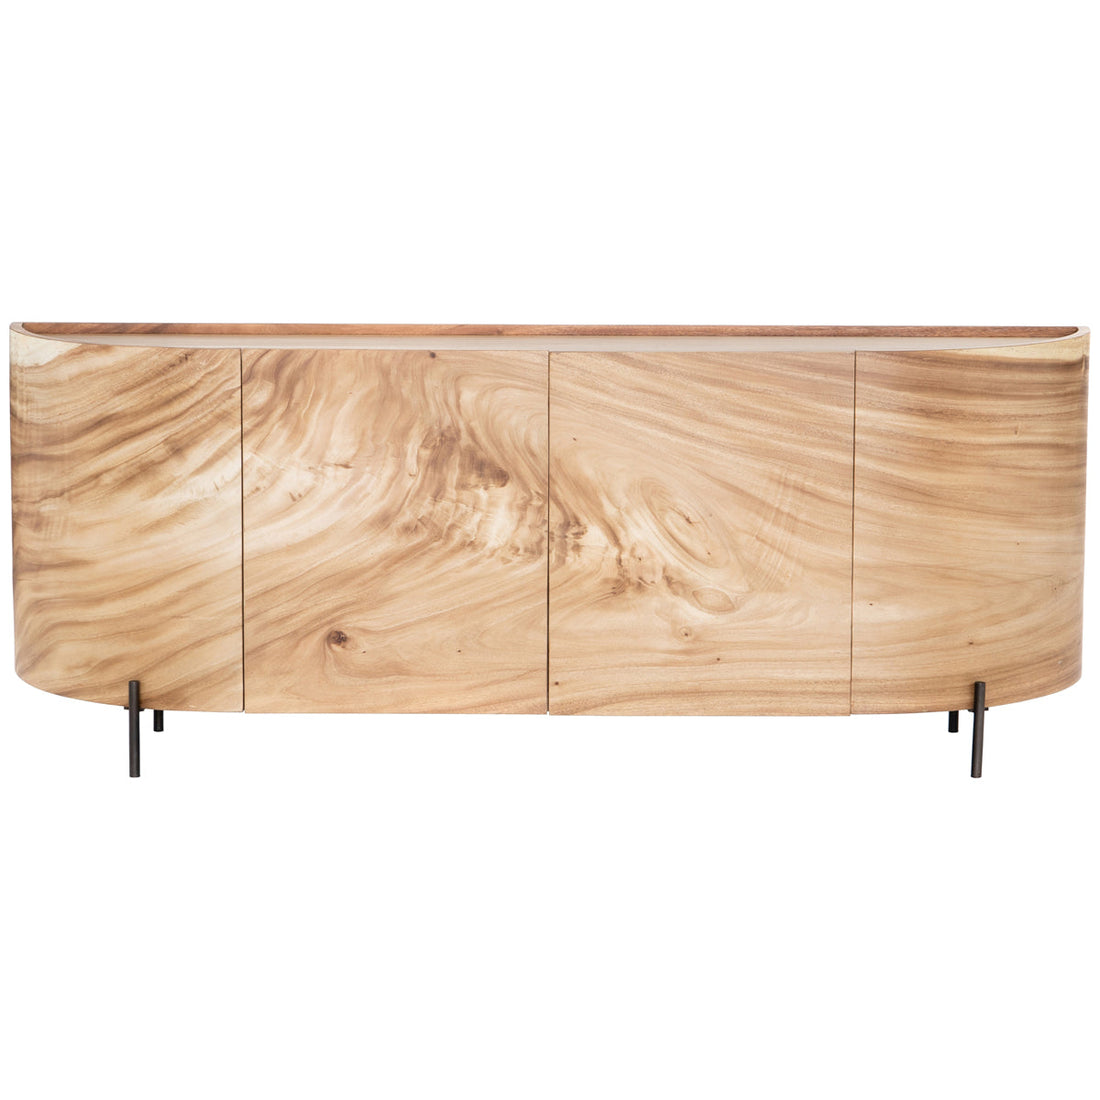 Four Hands Wesson Lunas Sideboard